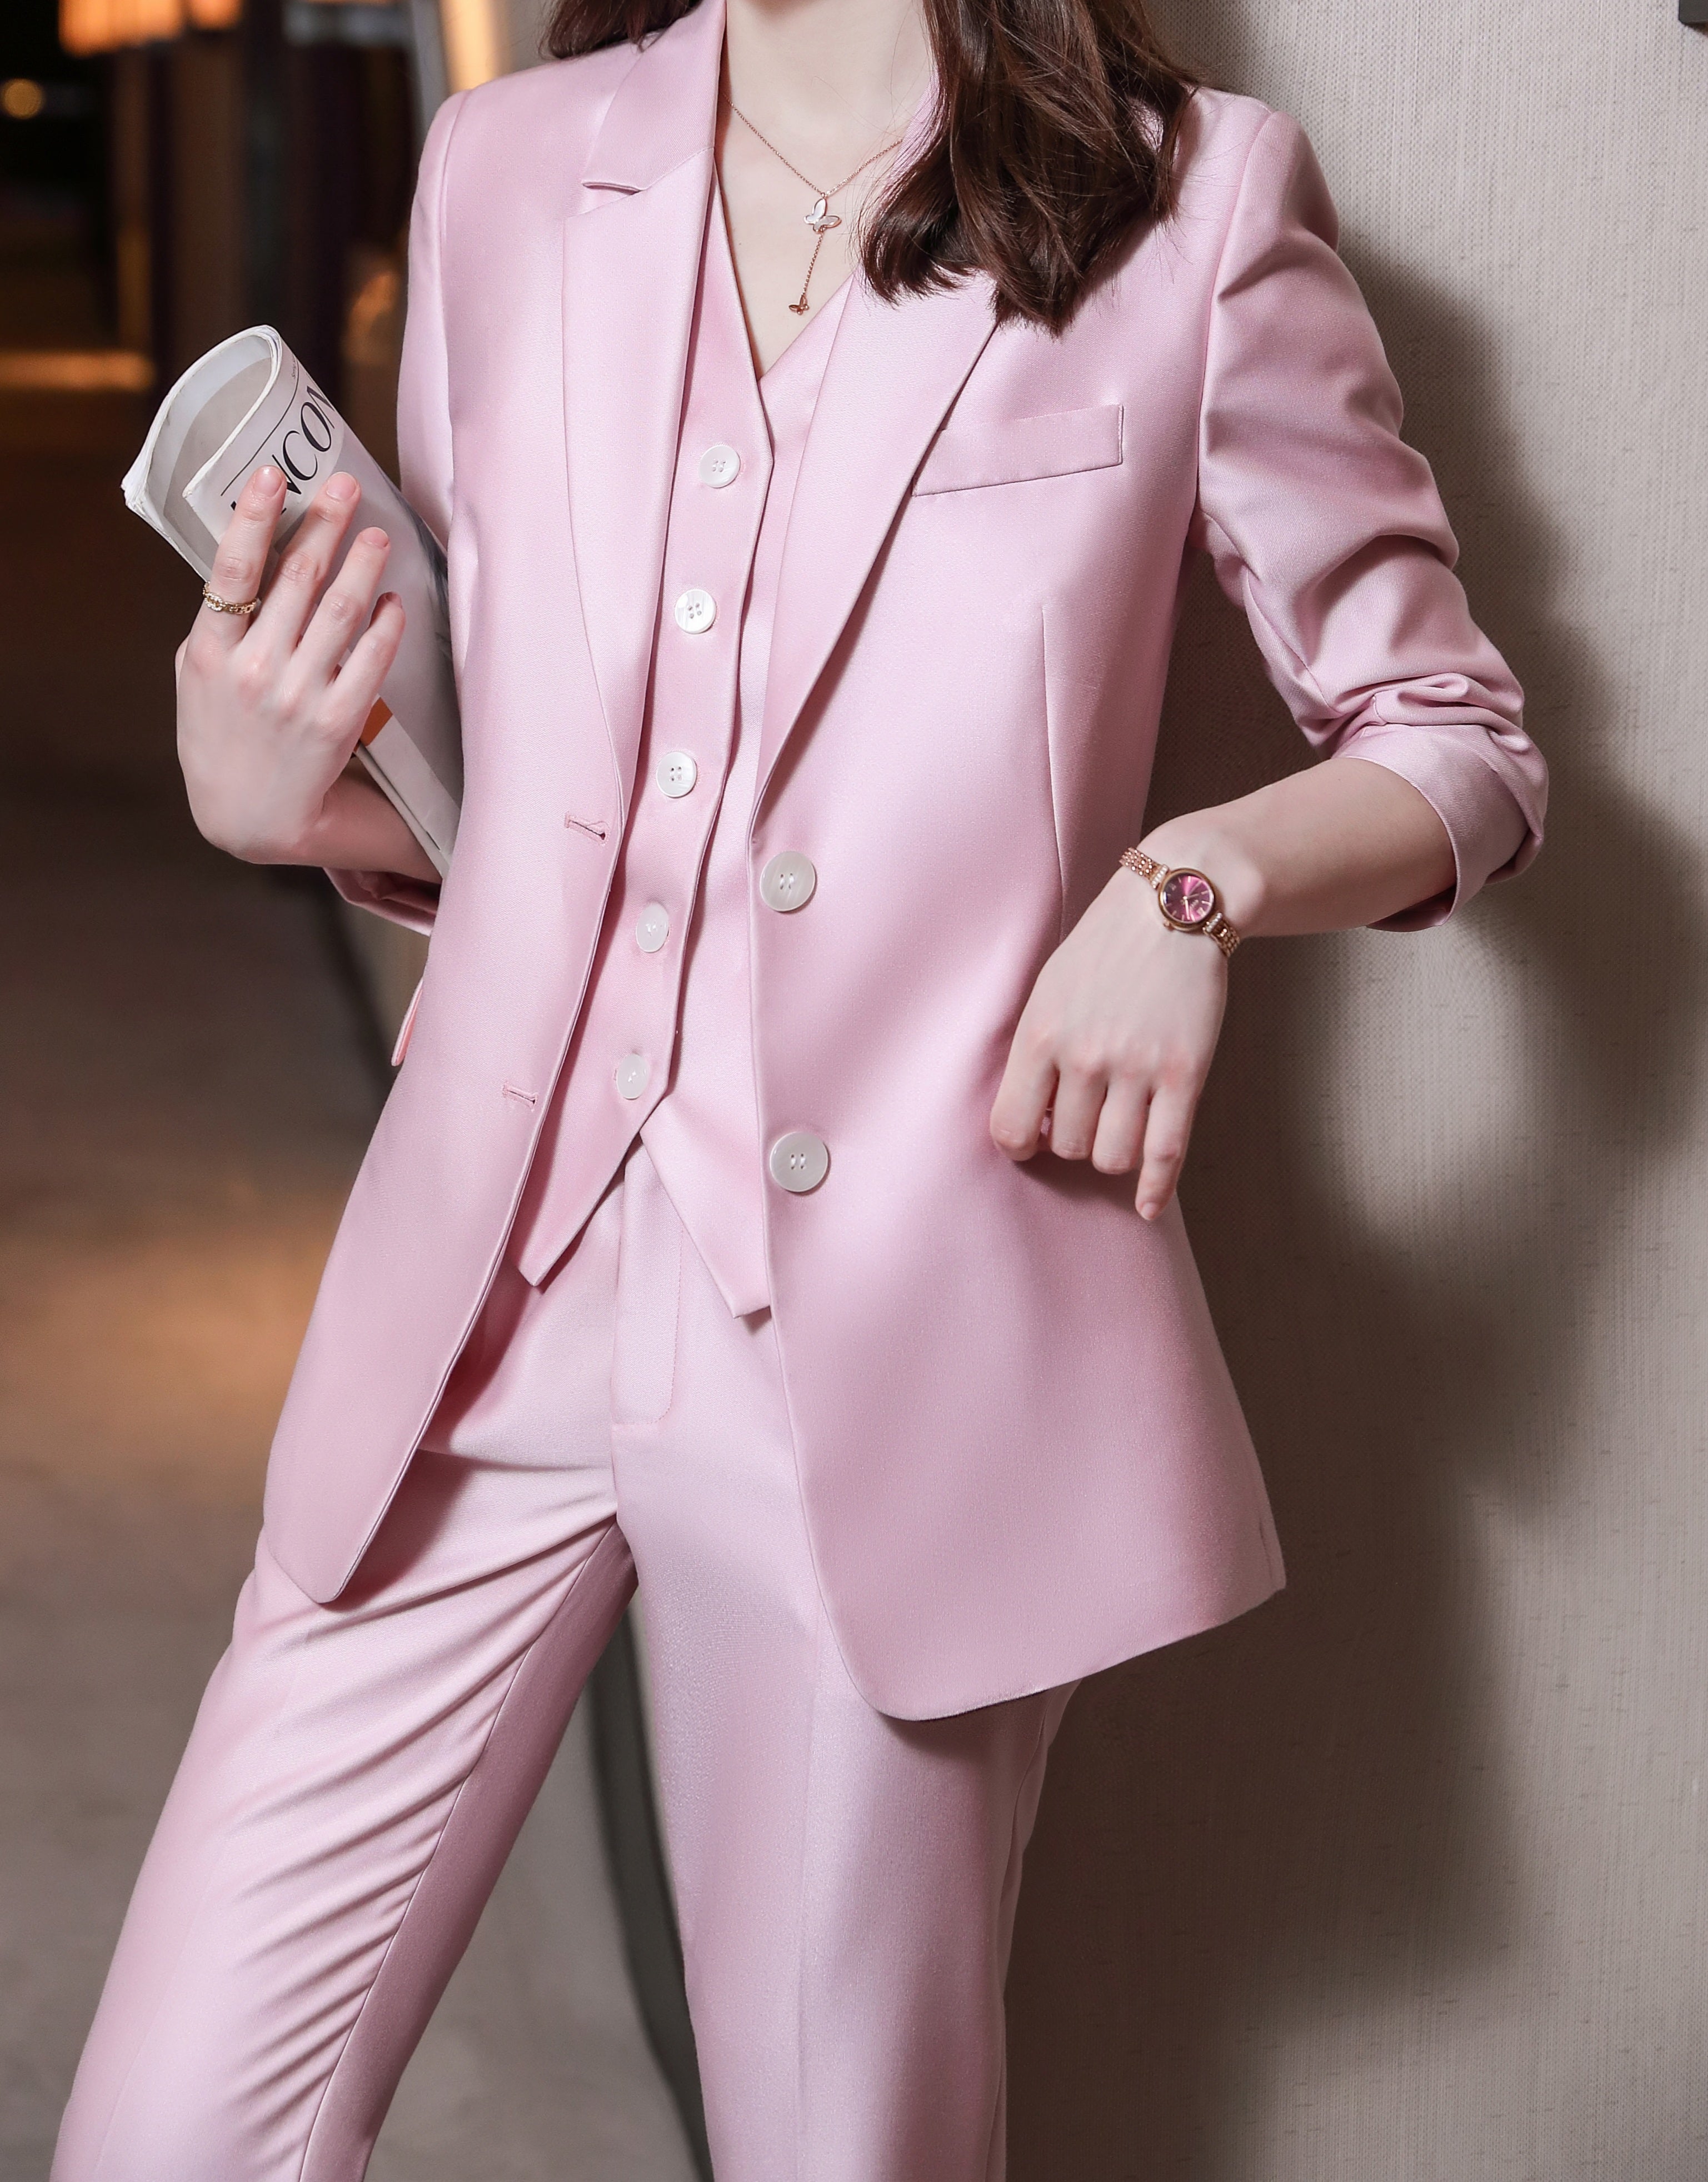 Pink 3-piece satin suit, satin suits with blazer, waistcoat and pants